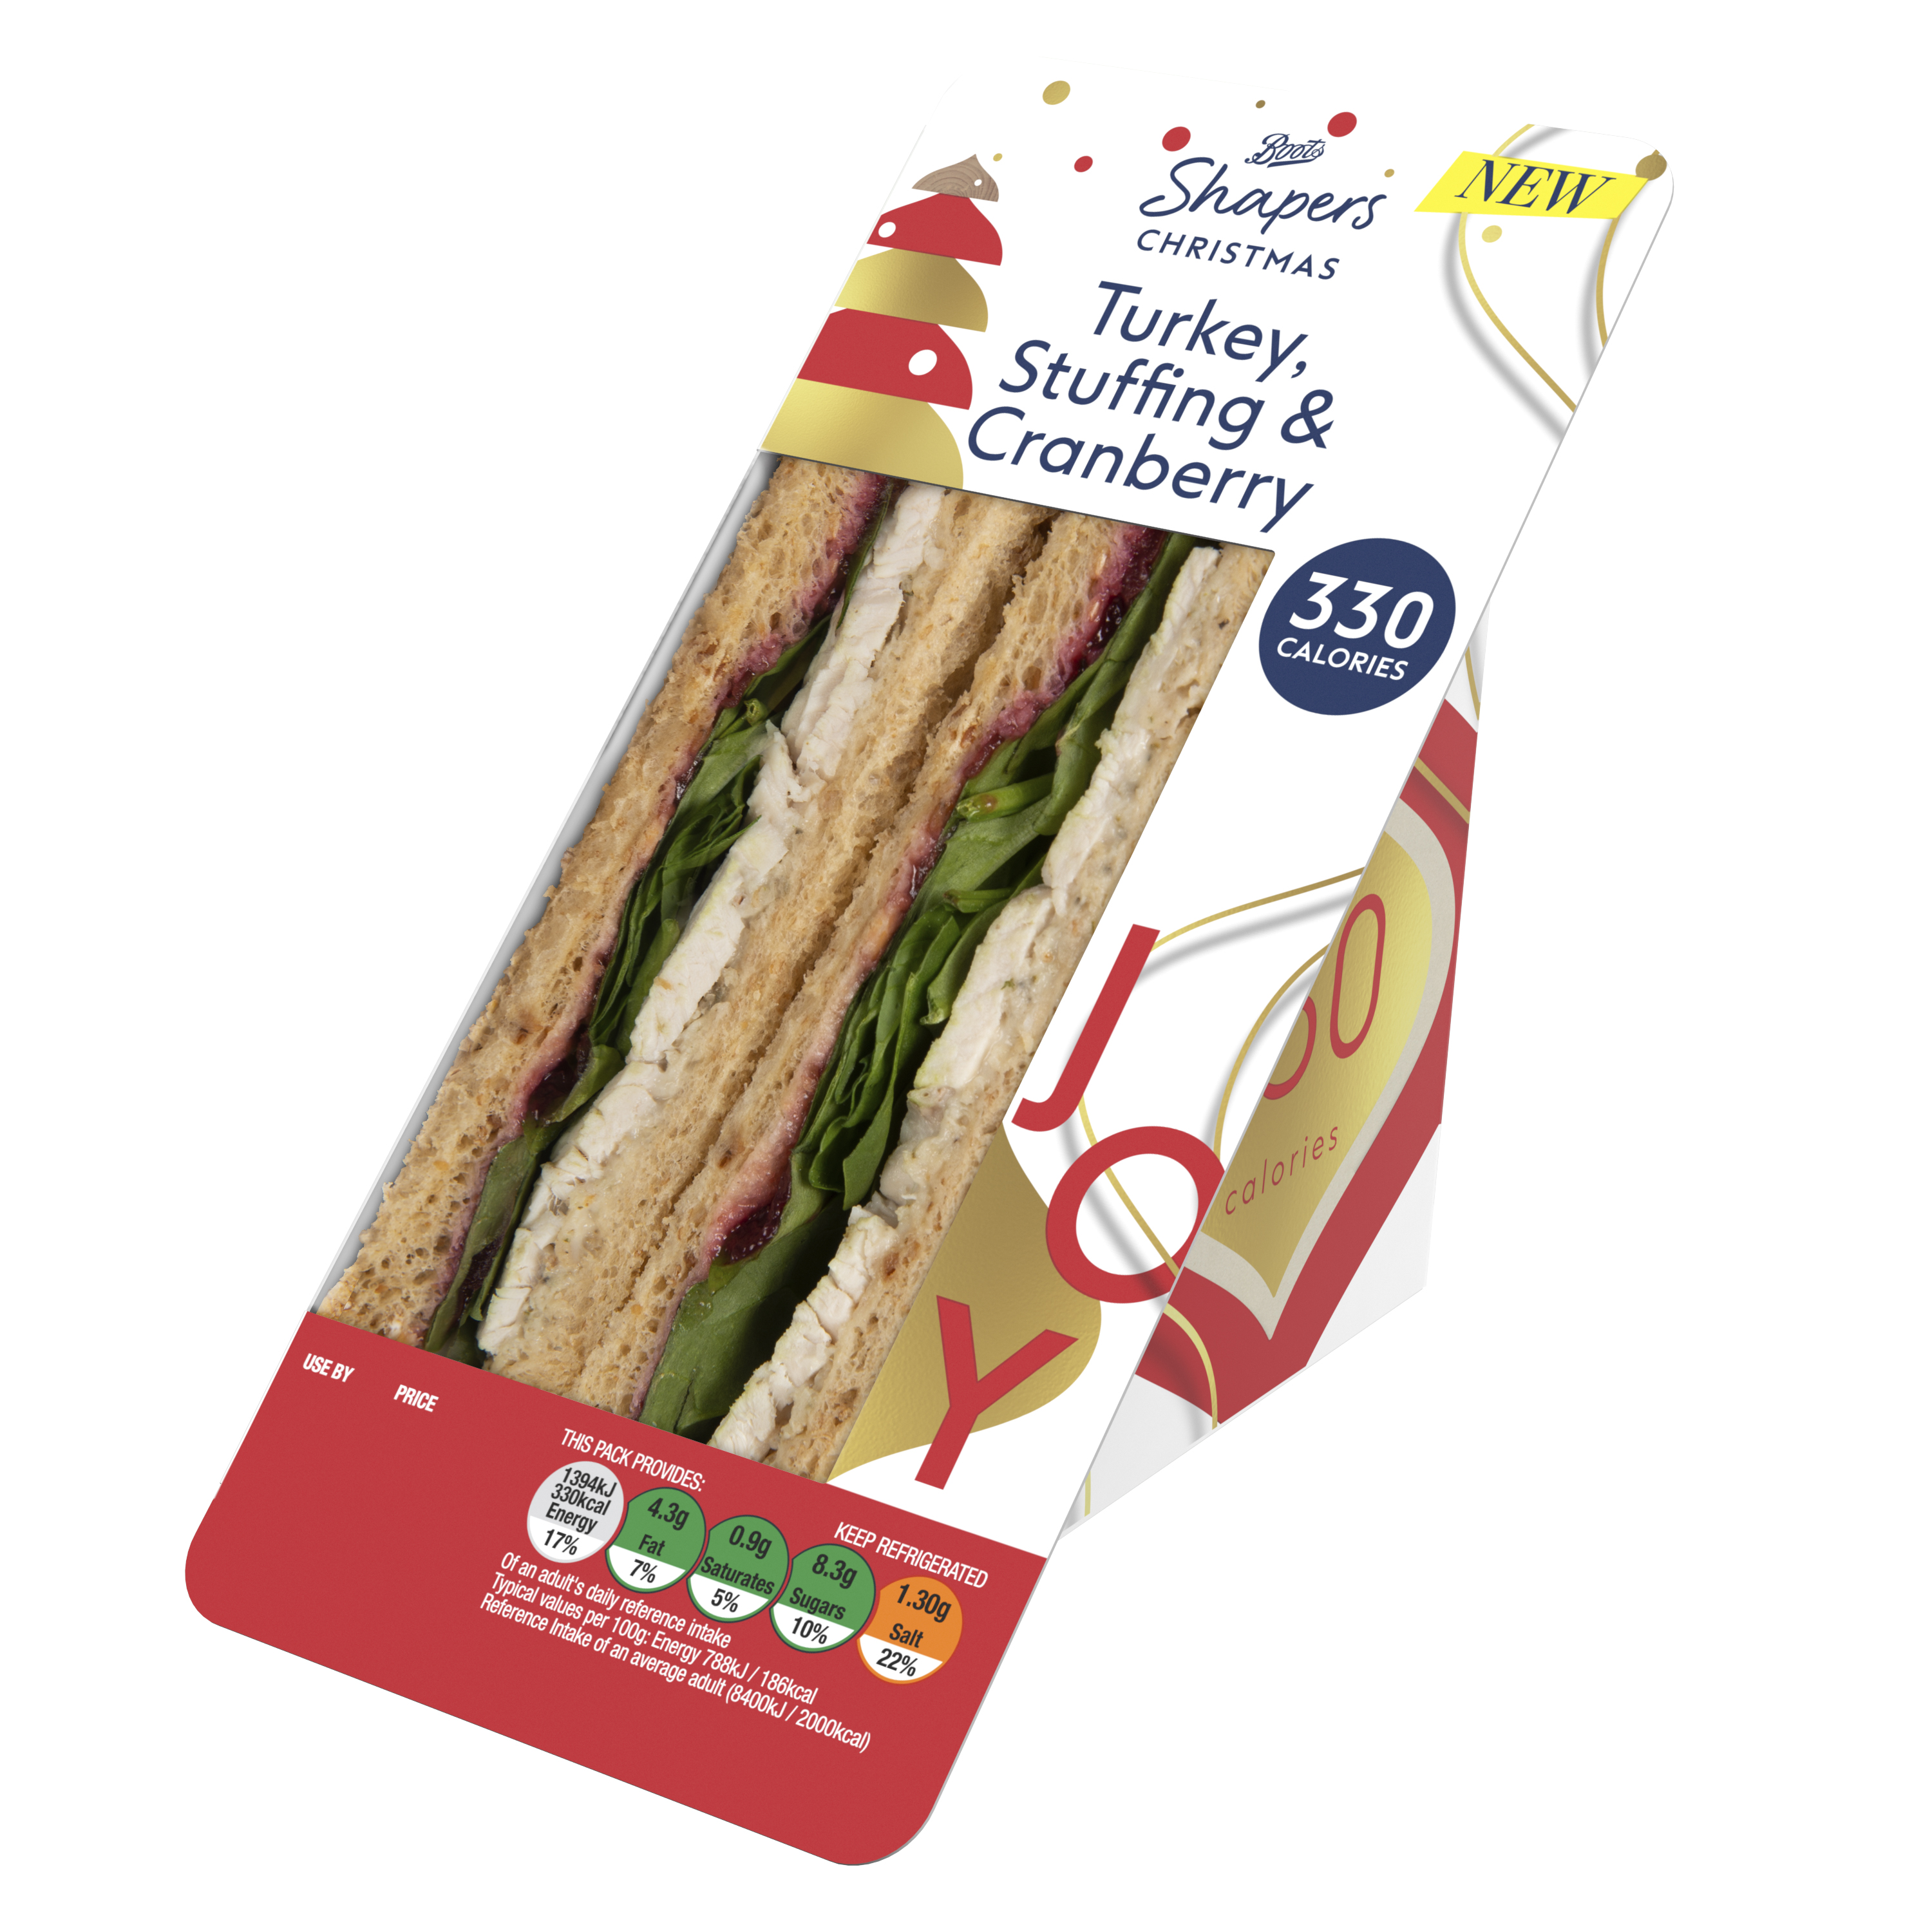 Shapers Turkey, Cranberry & Stuffing  £3.00